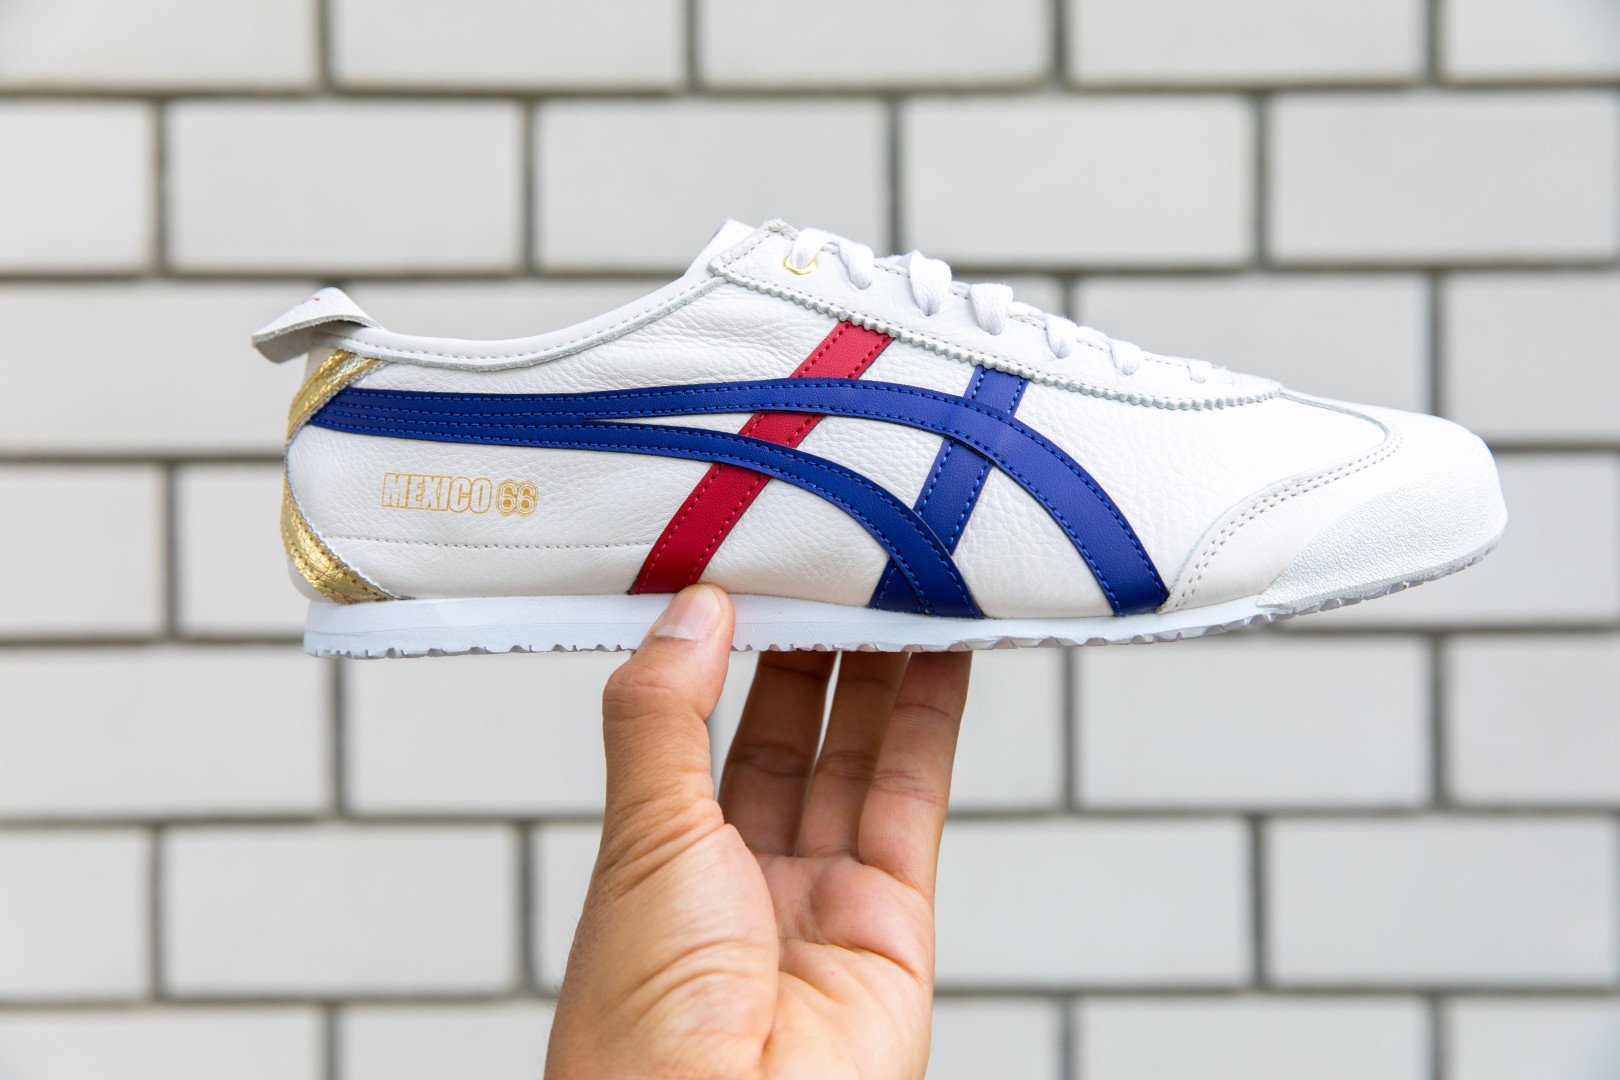 Onitsuka Tiger: Lee and actress Uma Thurman helped sports shoe brand become a global fashion must-have | China Morning Post